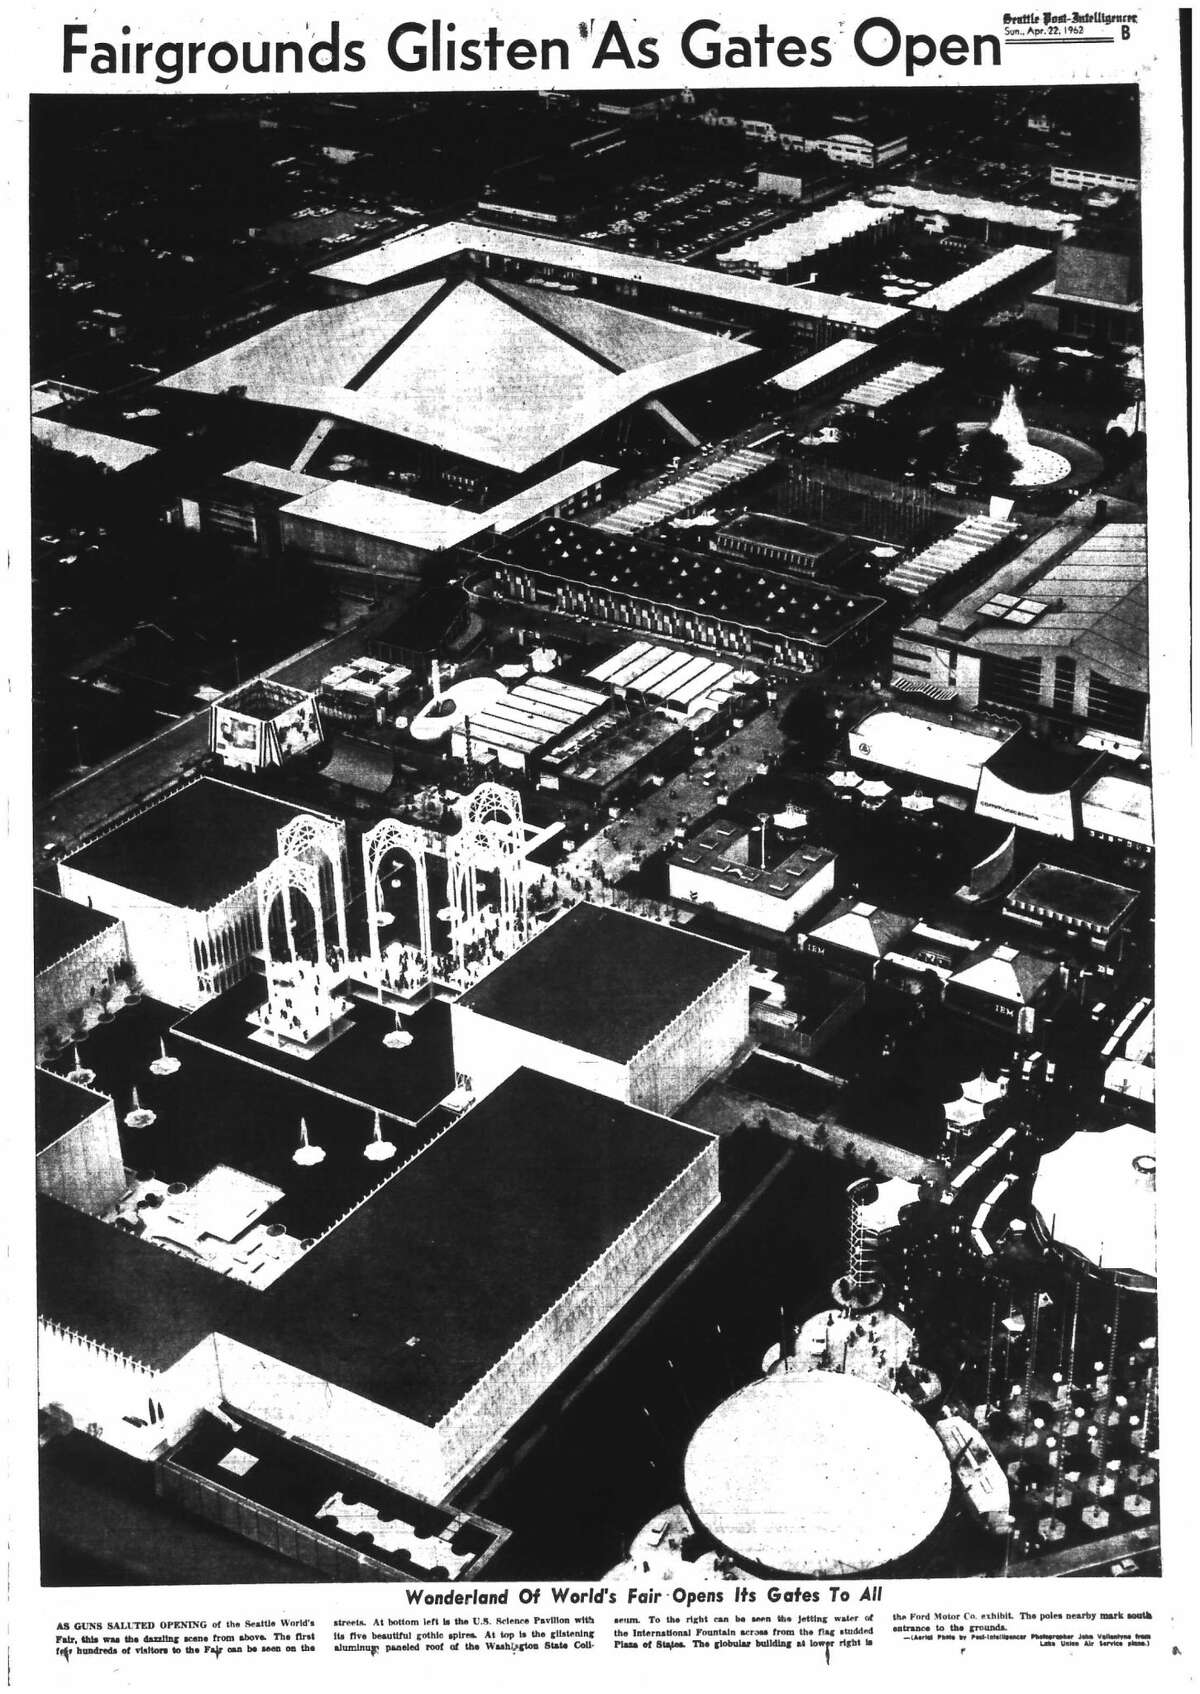 The P-I ran this aerial shot of the World's Fair campus, looking to the northwest, April 22, 1962.